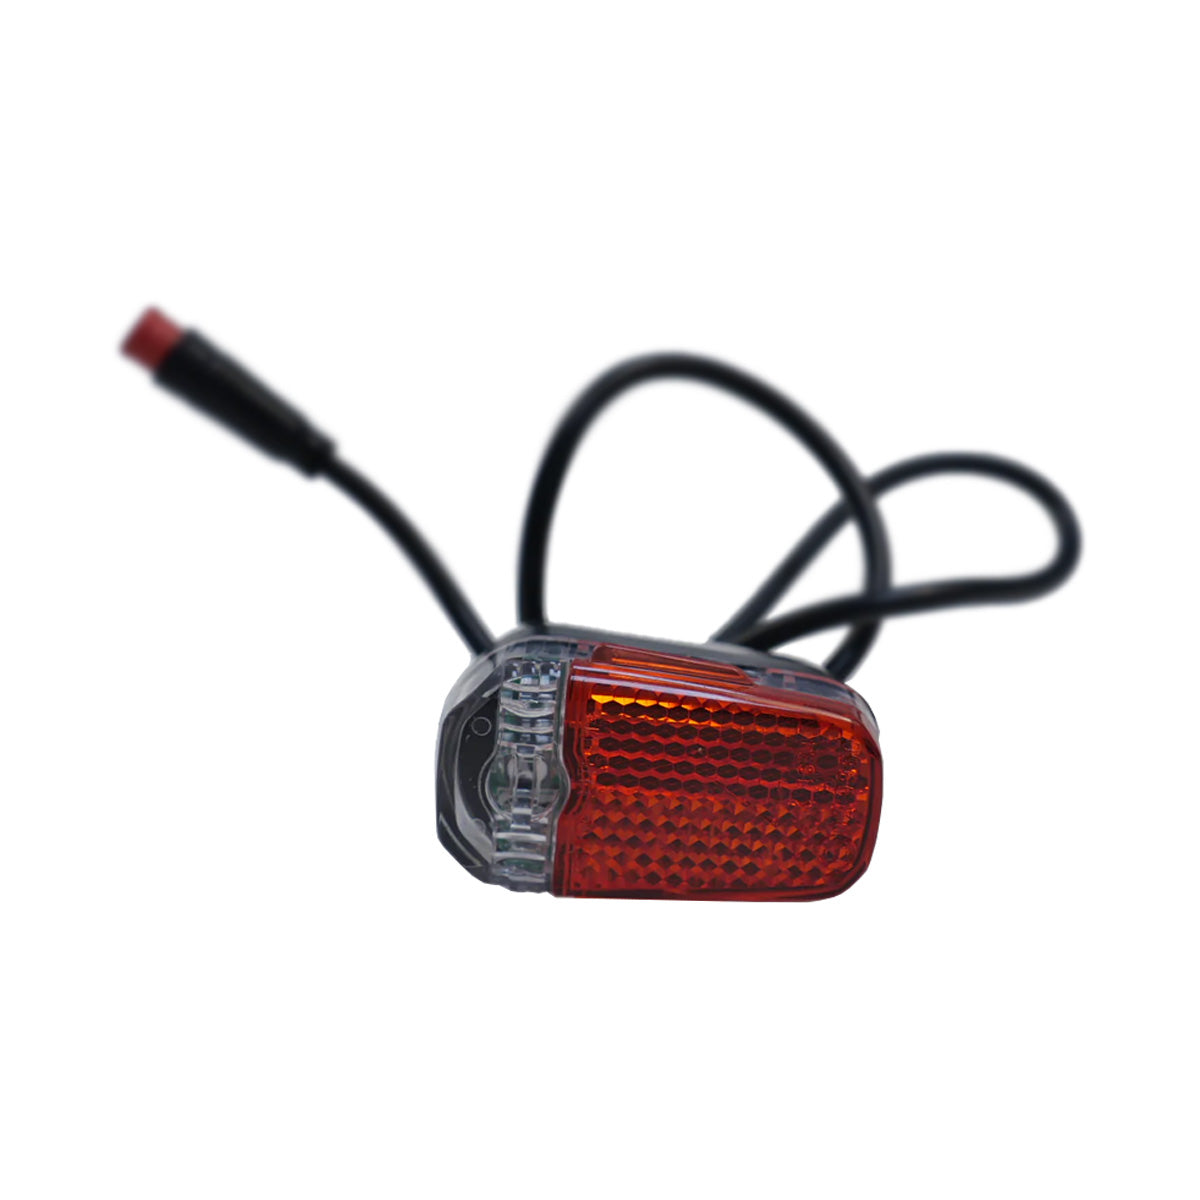 Rear Light - Only fits Pure Air 2nd Gen scooters